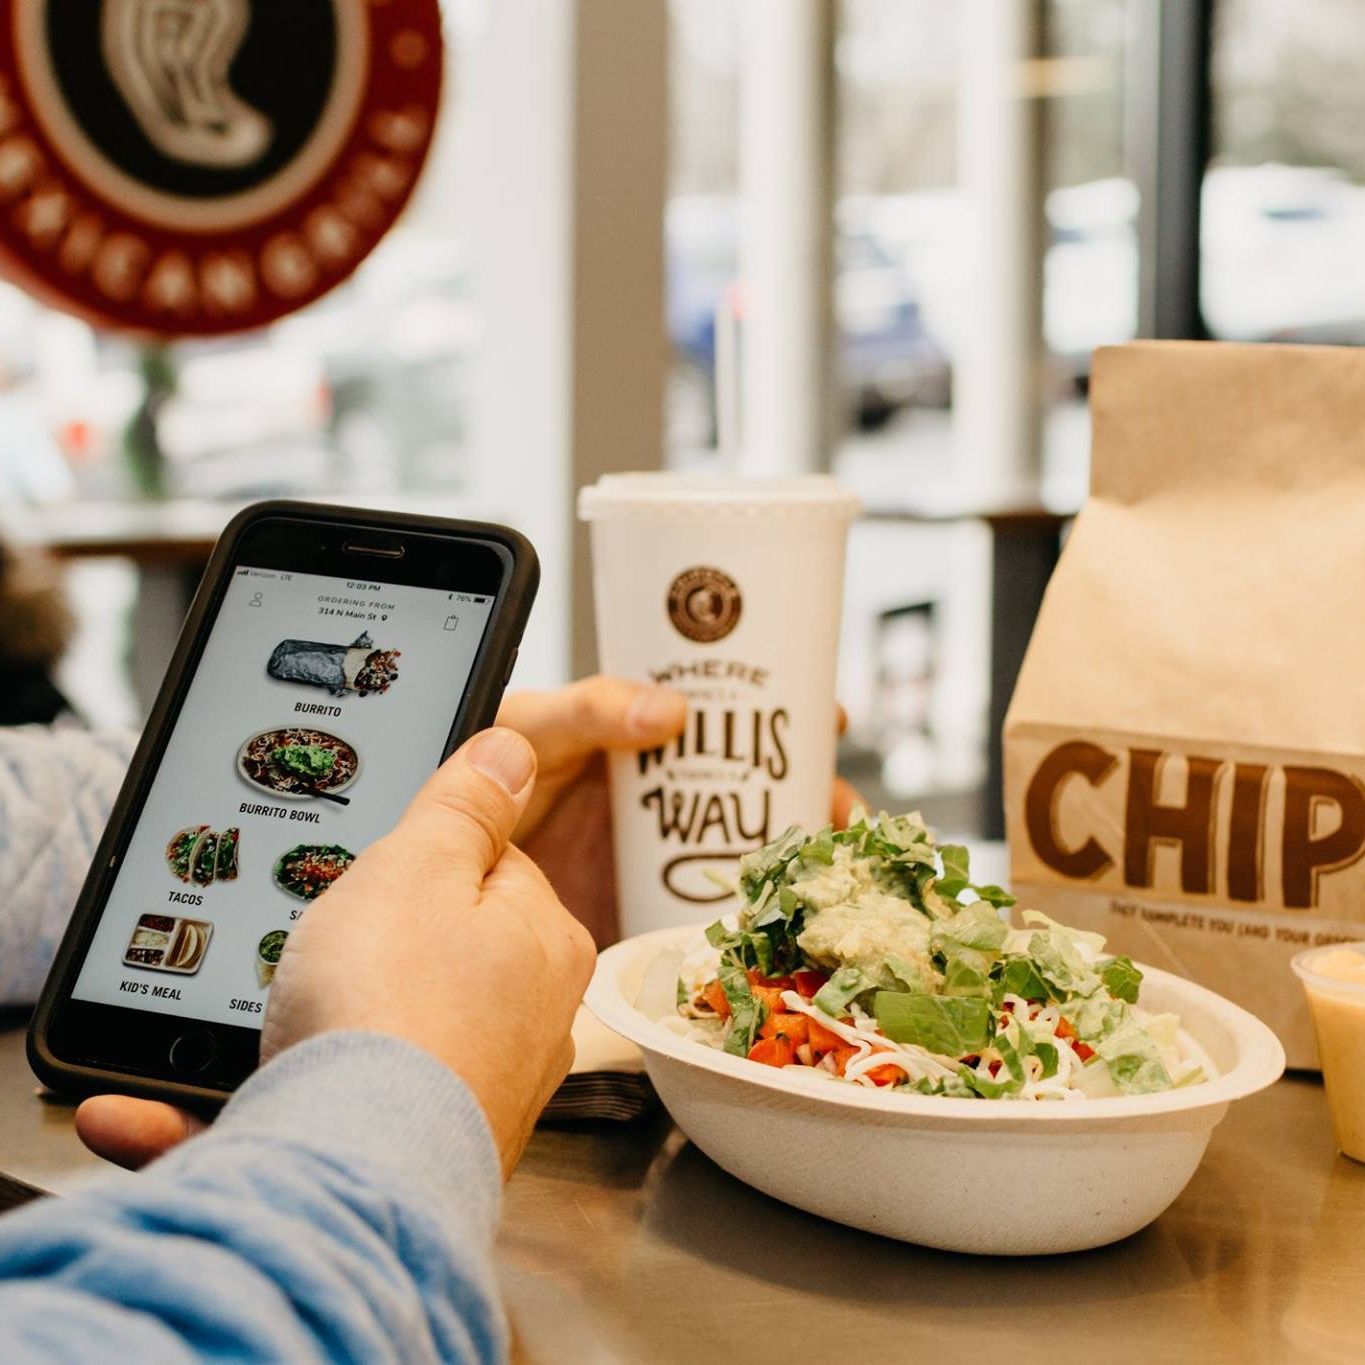 Content for Chipotle’s mobile app launch